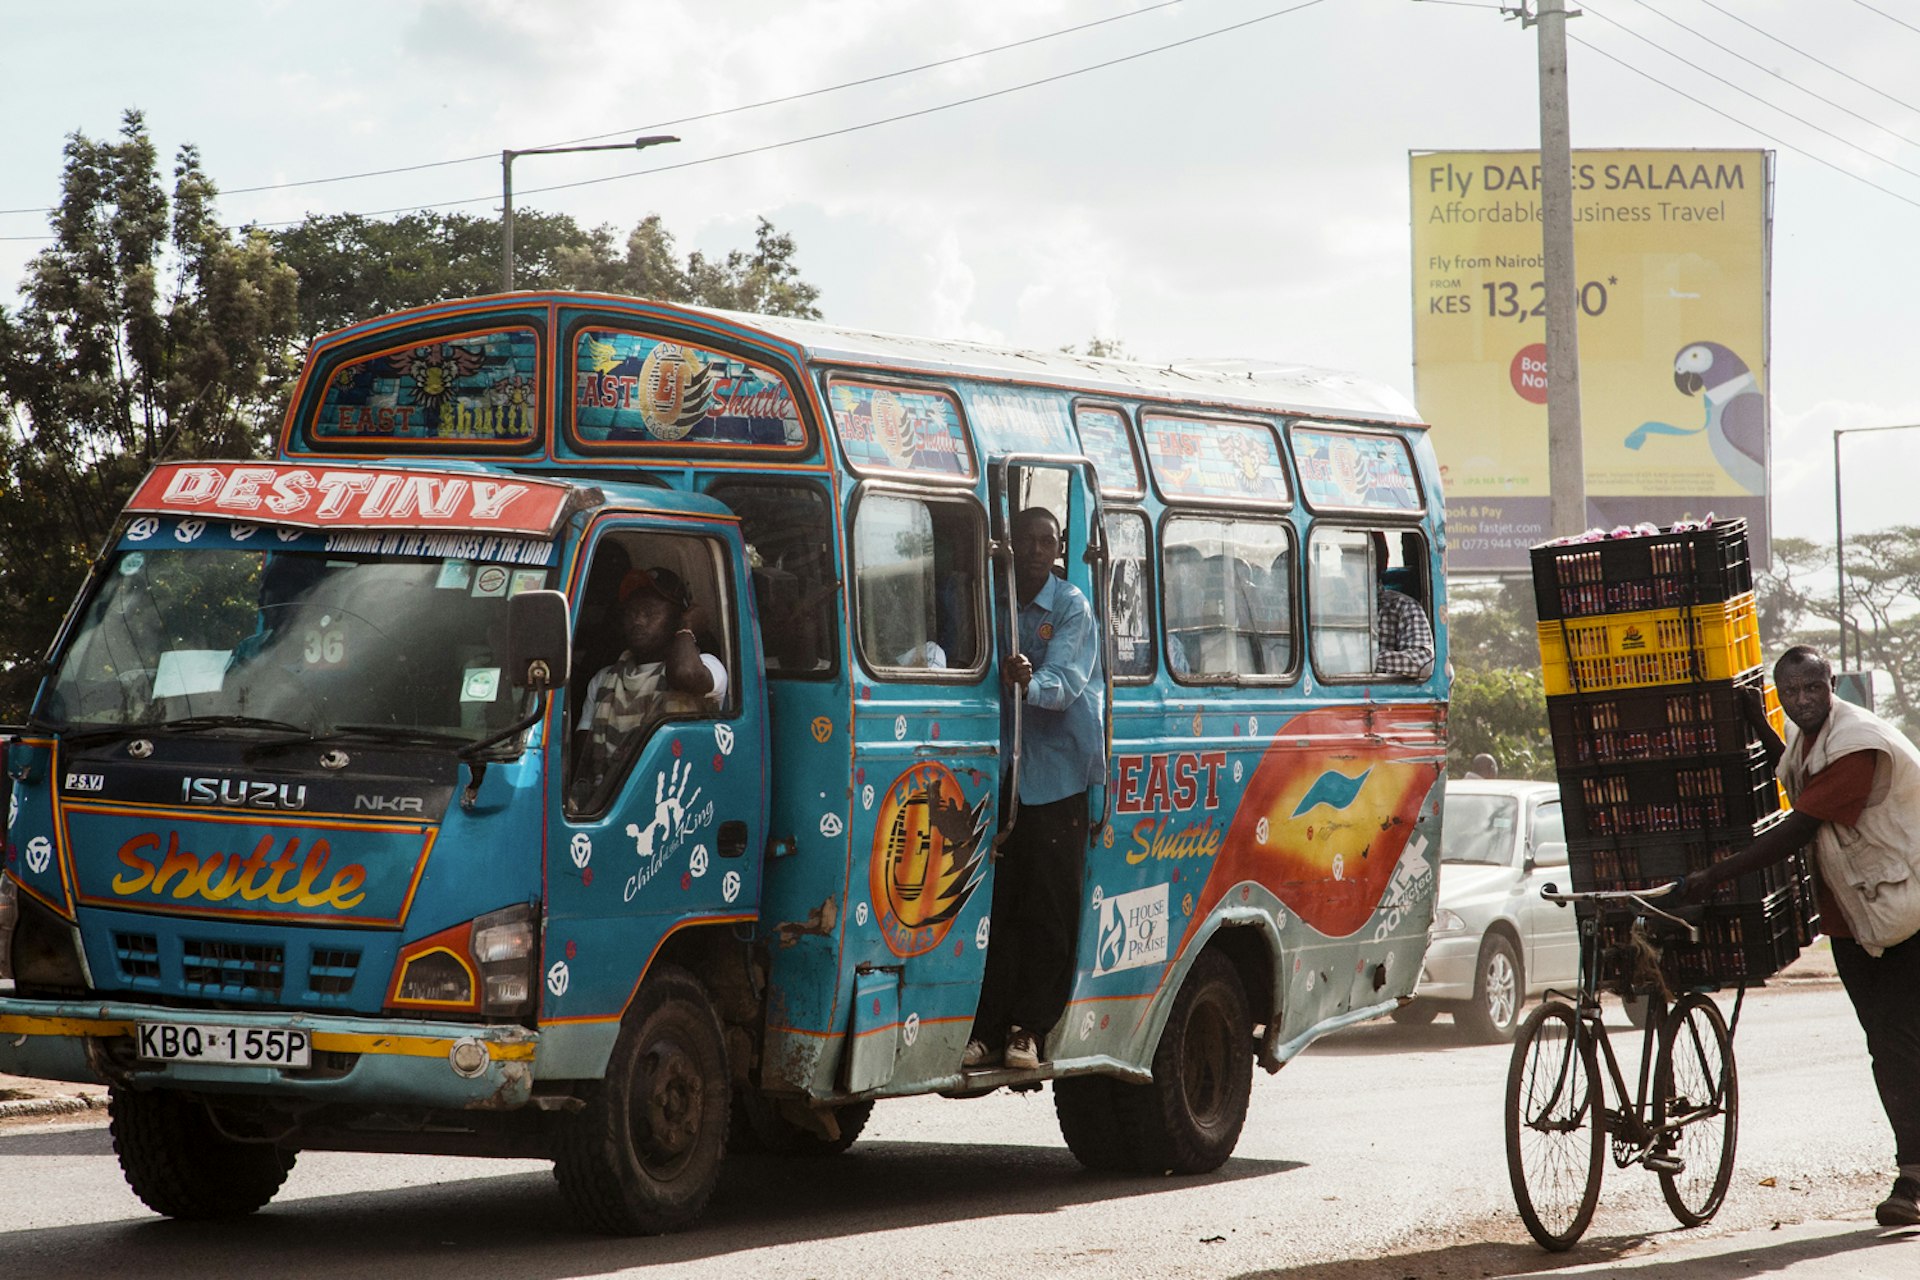 Nairobi’s bus drivers are hustling to get the most pimped out rides